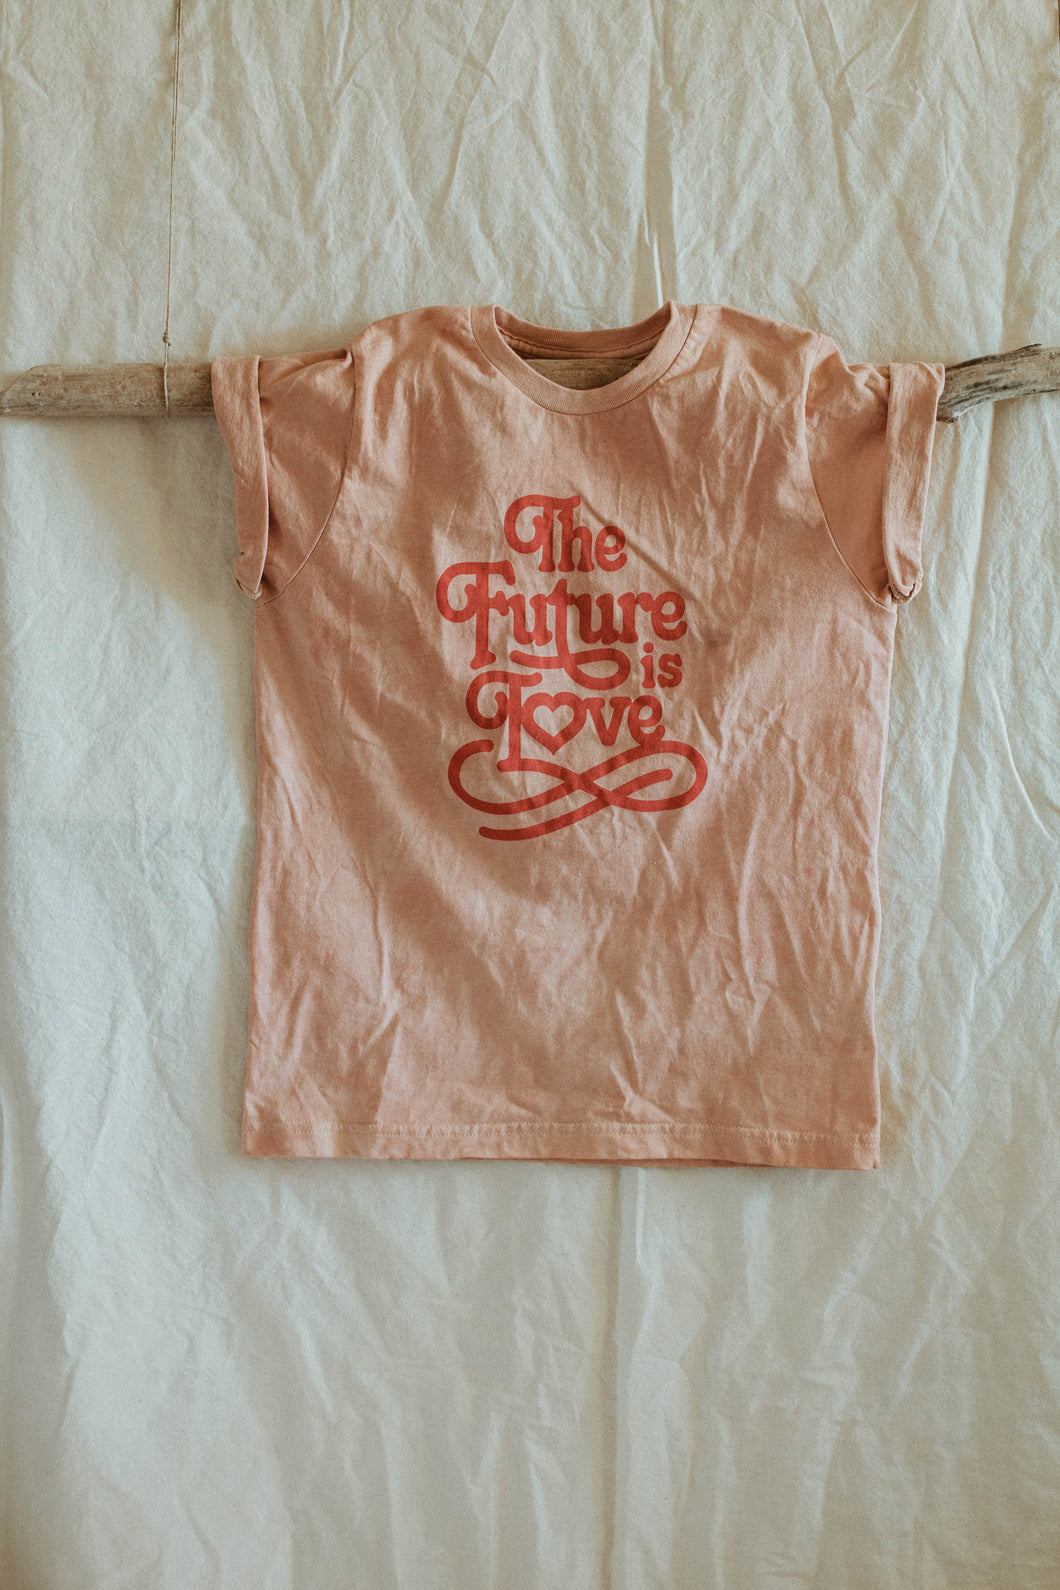 Naturally dyed cotton T shirt - the Future is Love graphic T shirt YOUTH-KIDS